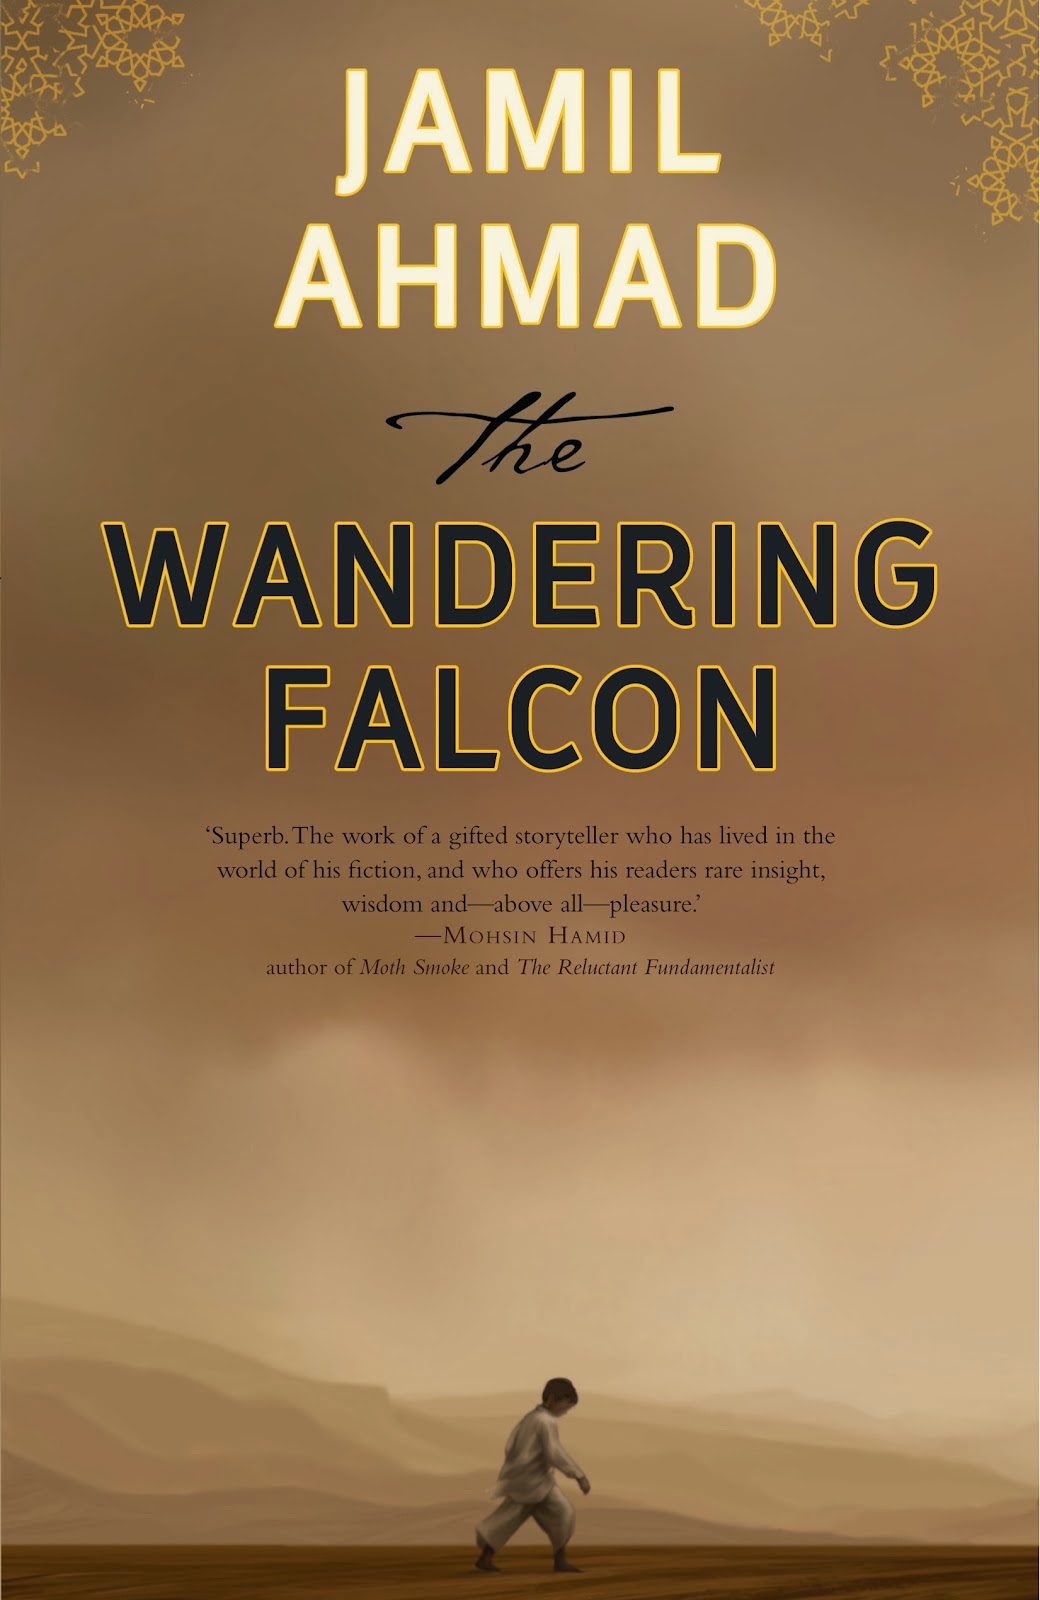 http://discover.halifaxpubliclibraries.ca/?q=title:wandering%20falcon